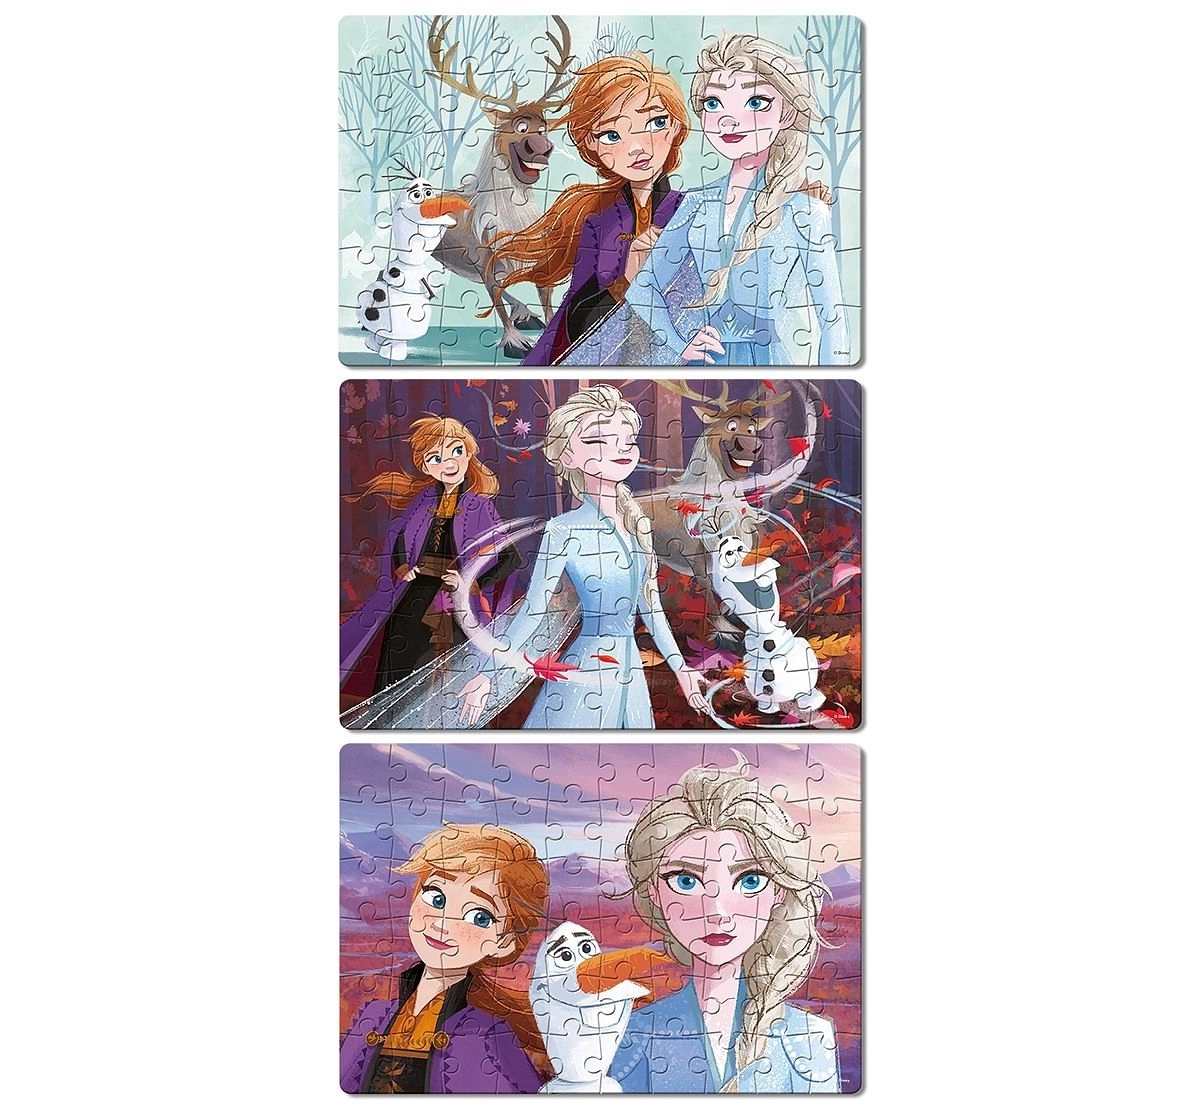 Frank Frozen II Puzzle  for age 5Y+ 